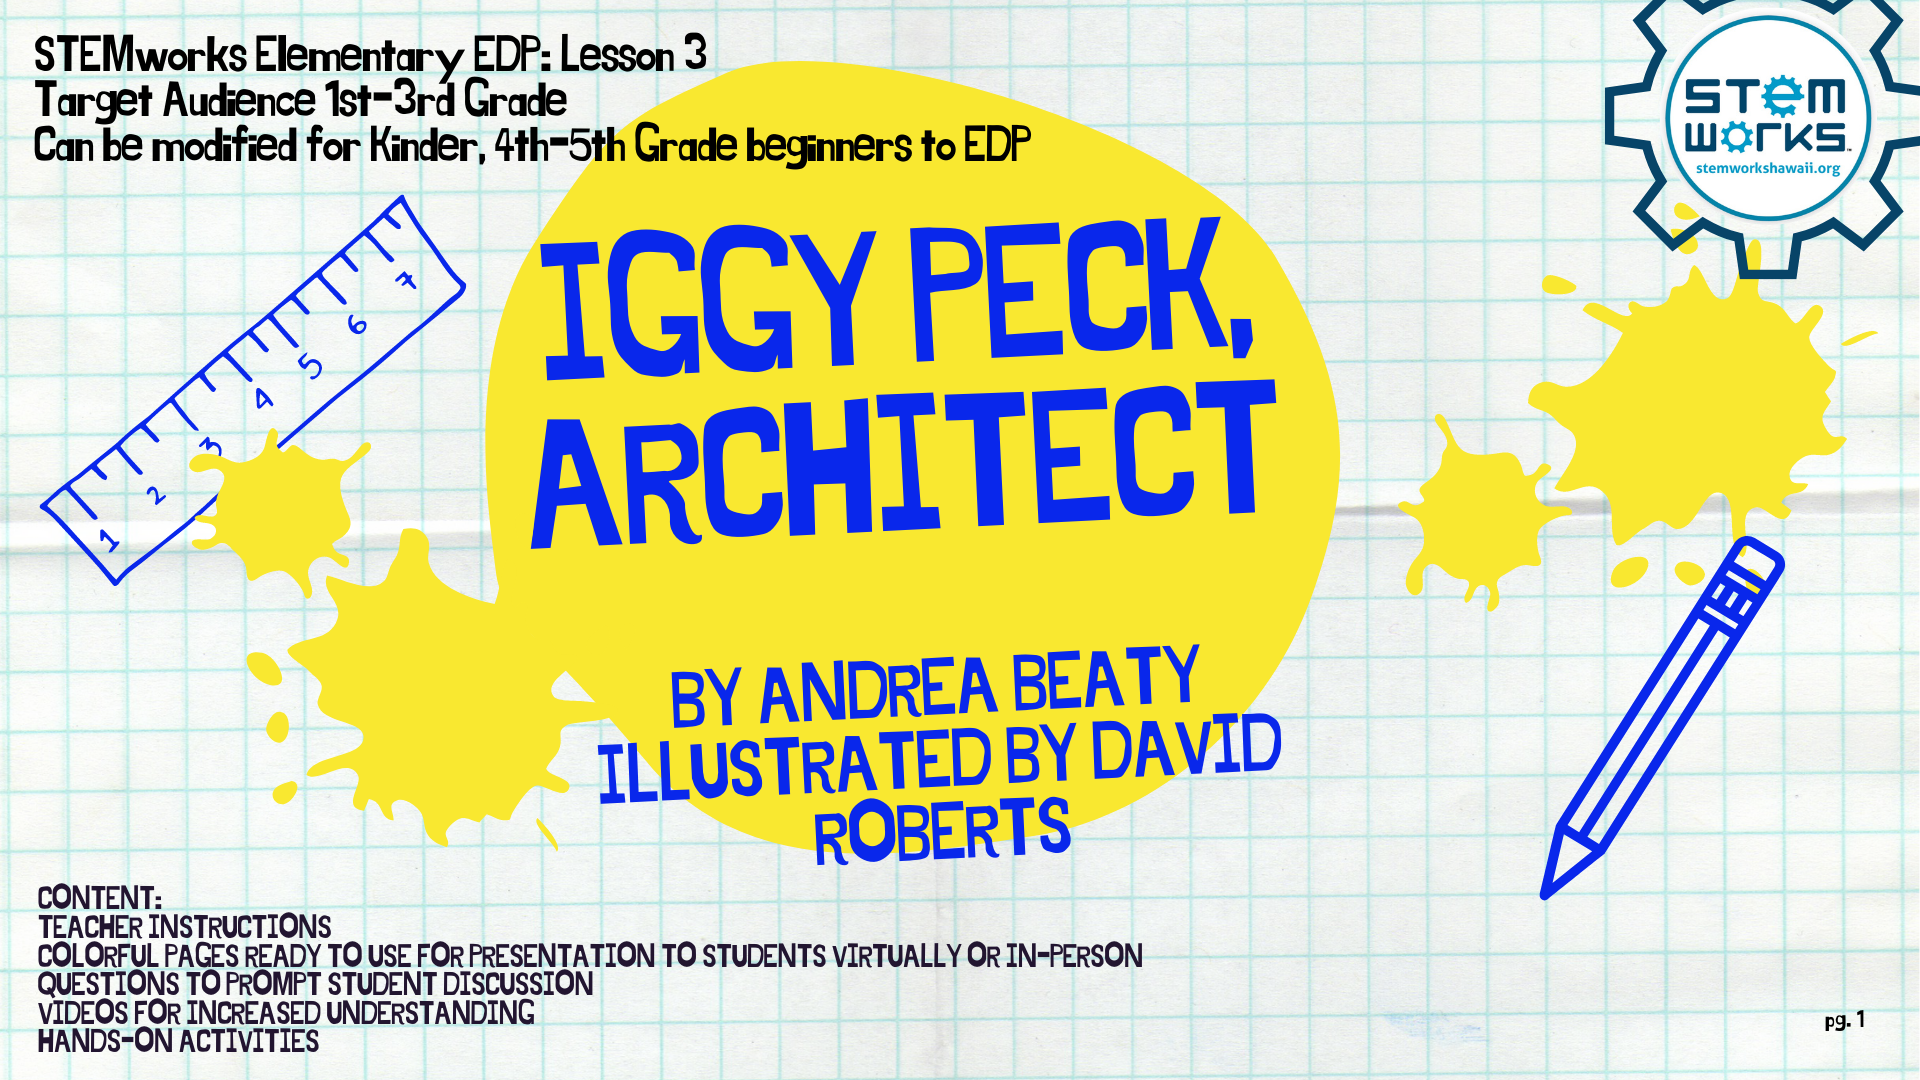 Student Slides Only_Iggy Peck, Architect.png